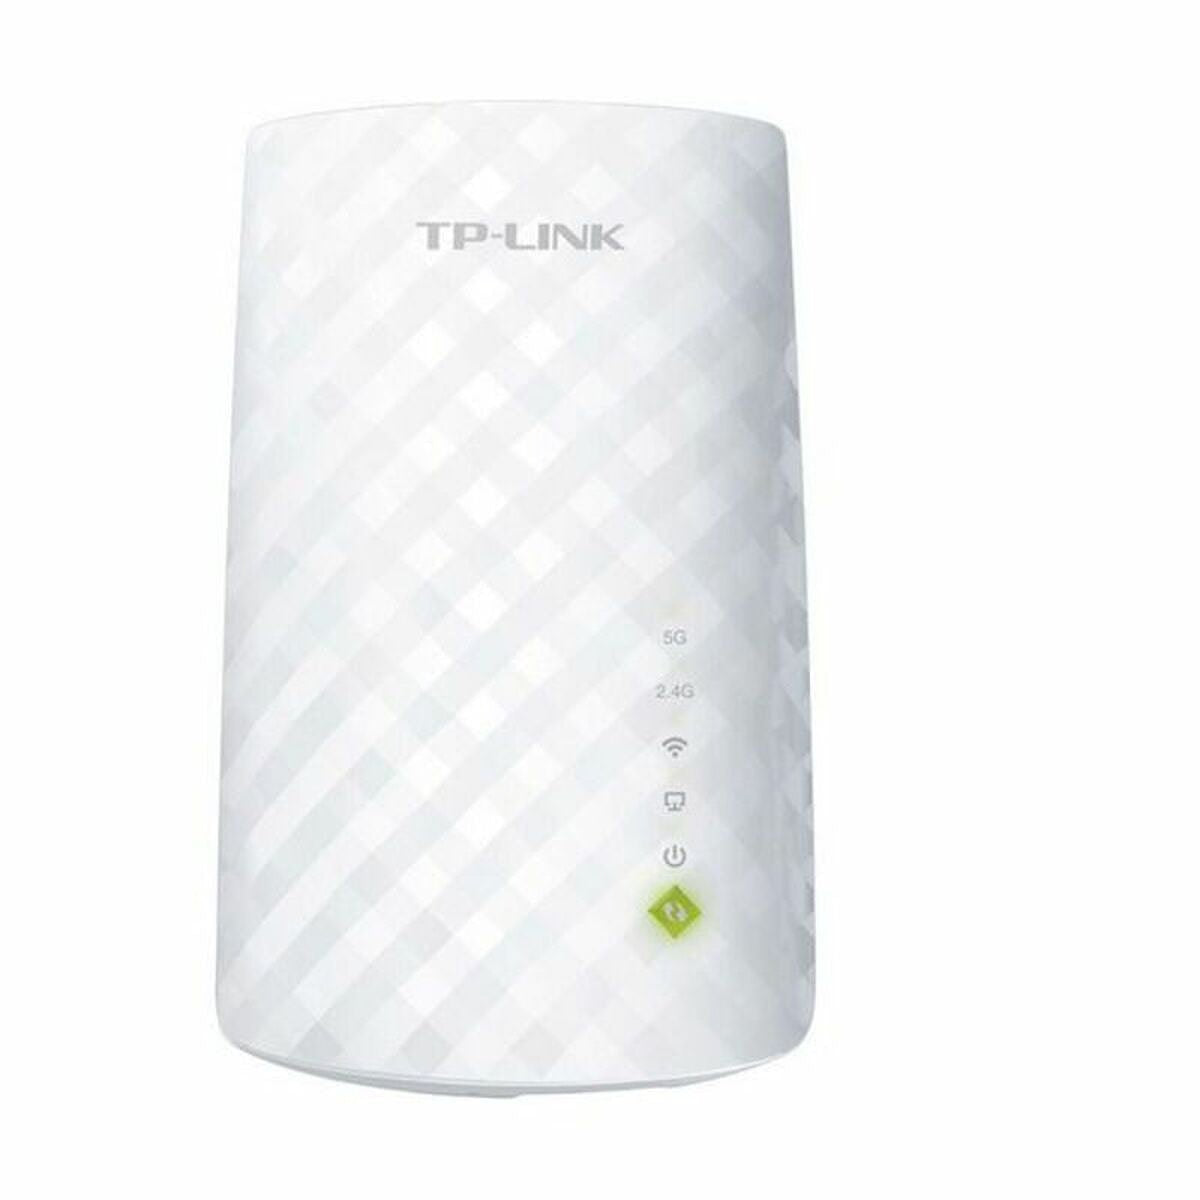 Wi-Fi-Repeater TP-Link RE200 5 GHz 433 Mbps